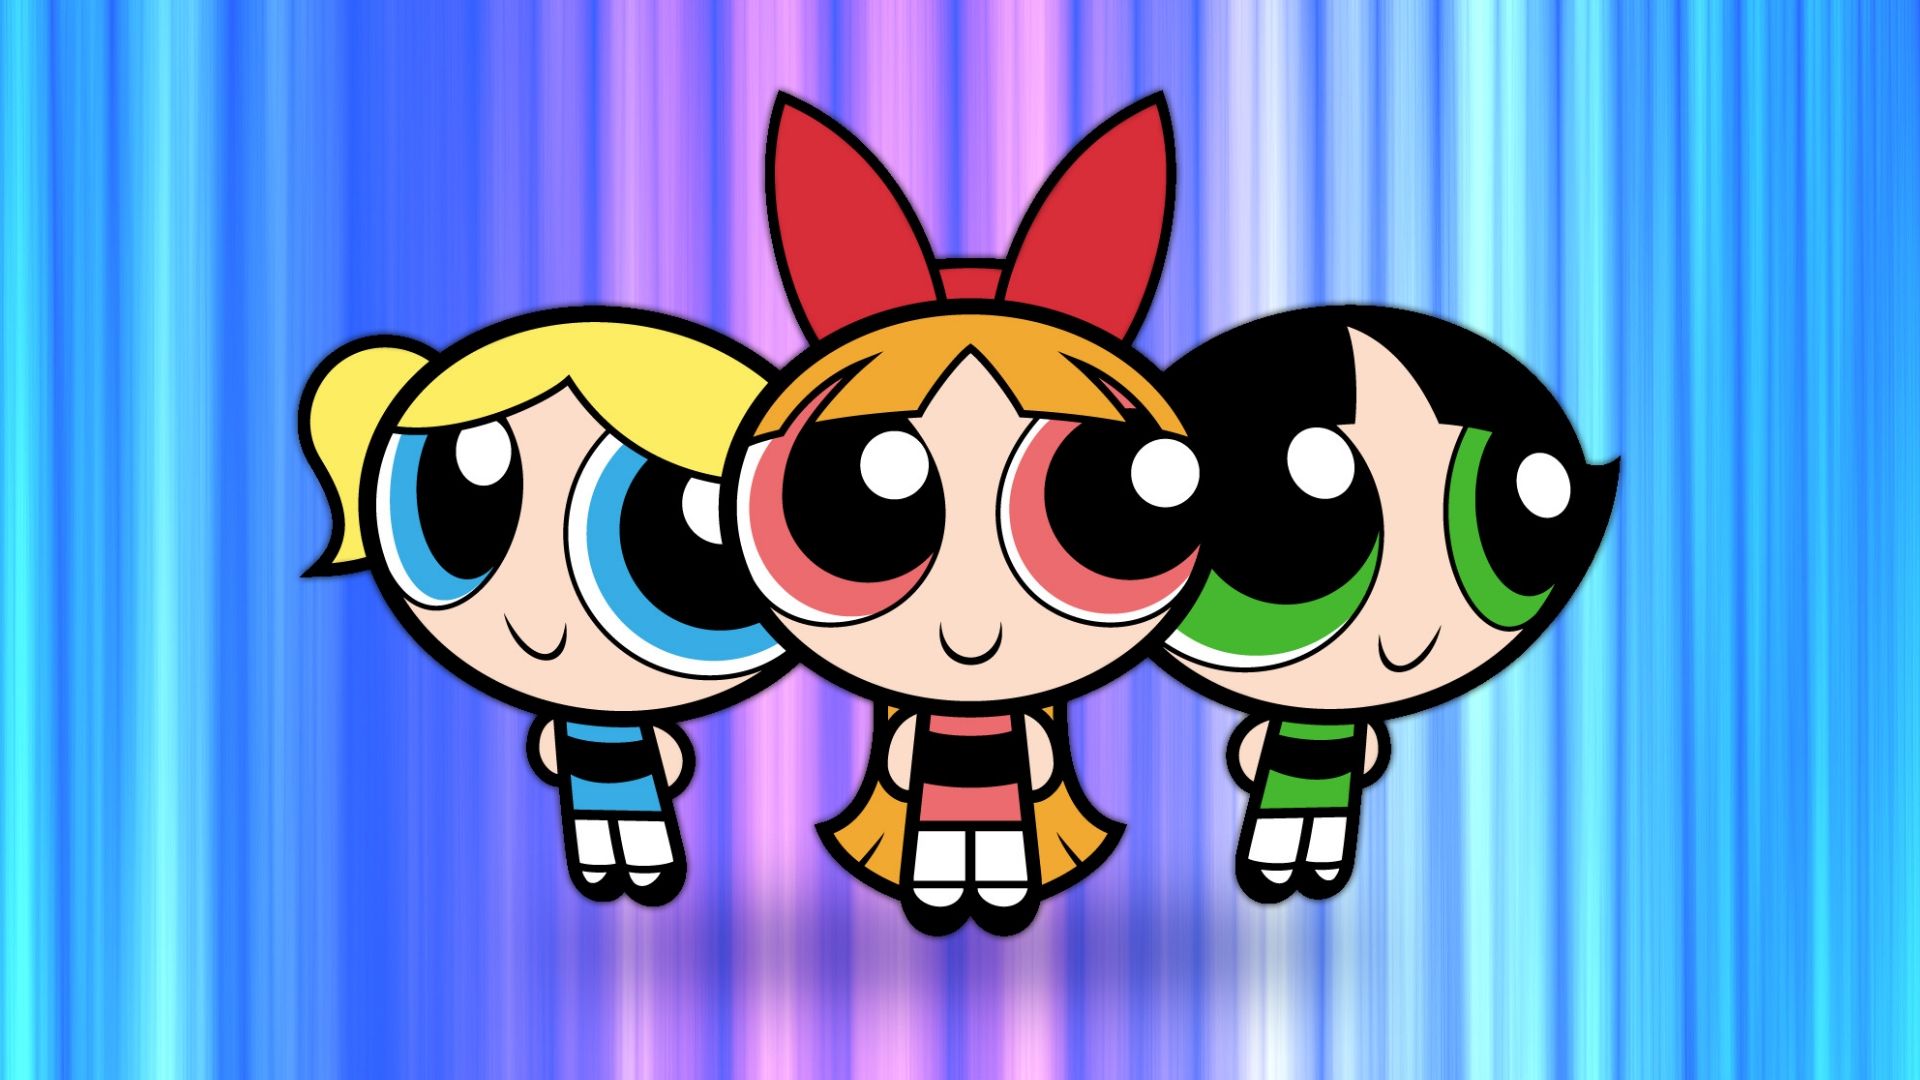 Free Download The PowerPuff Girls 2016 Images Wallpapers